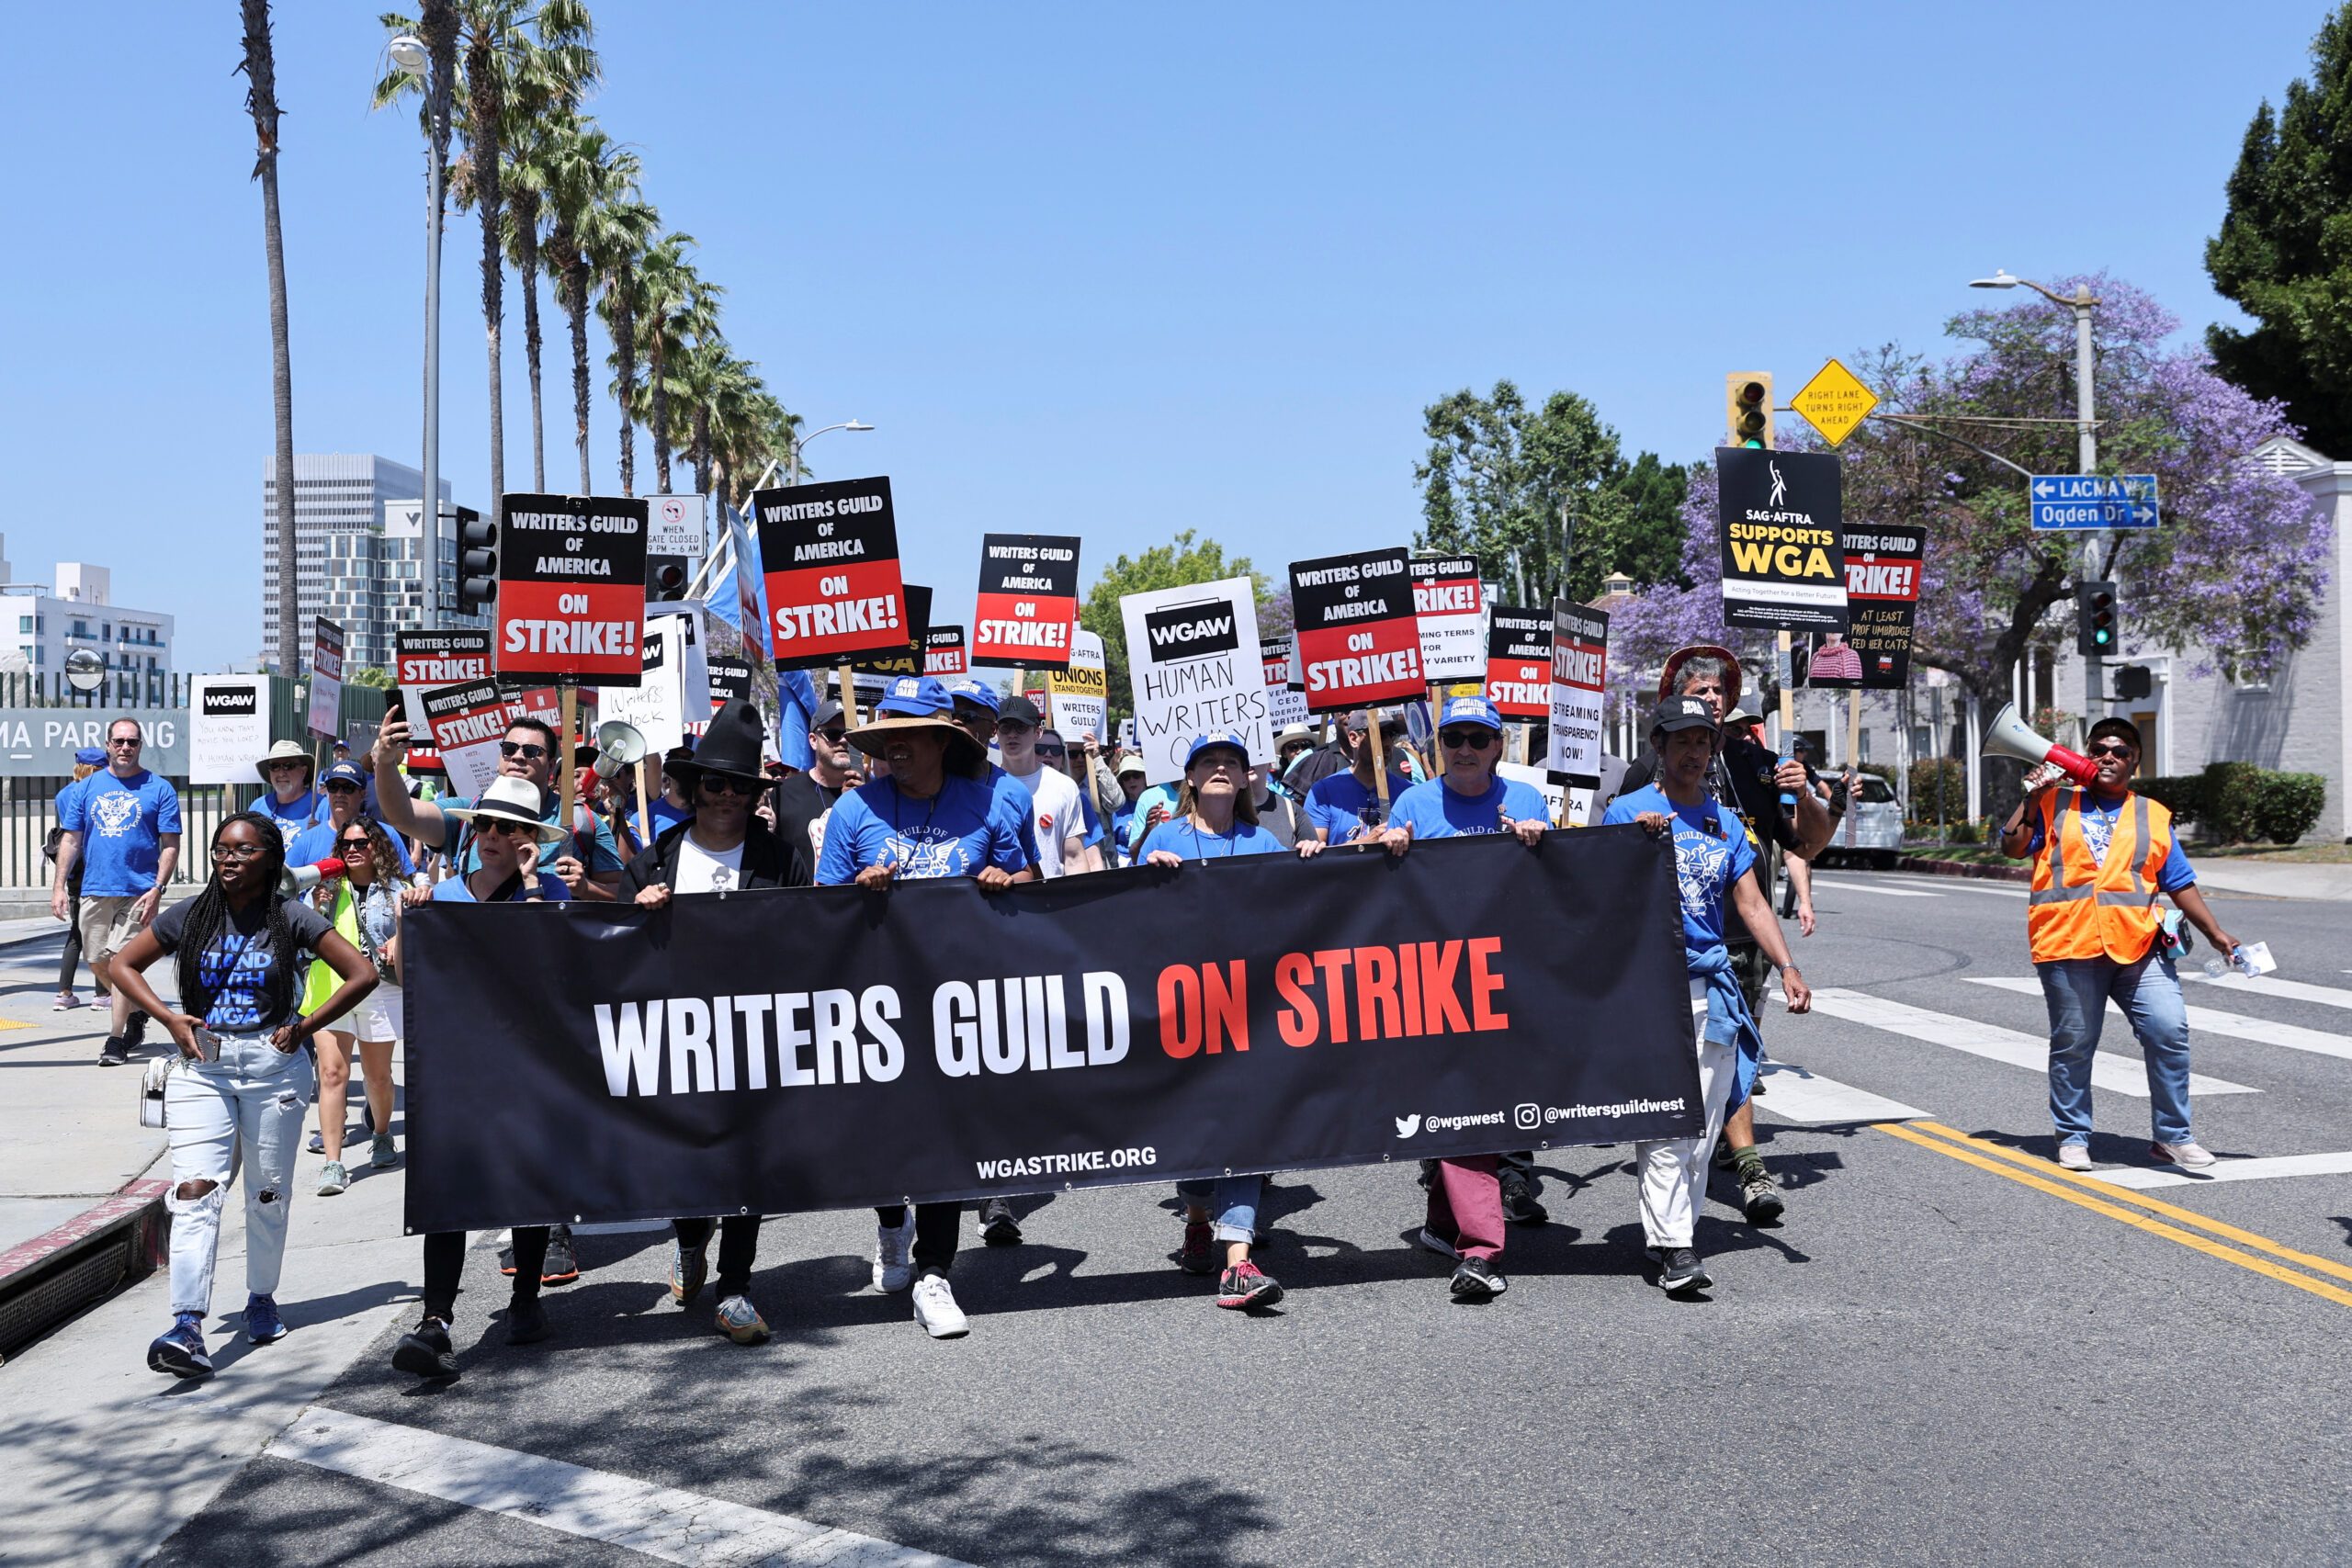 Hollywood directors ratify labor pact as writers continue strike